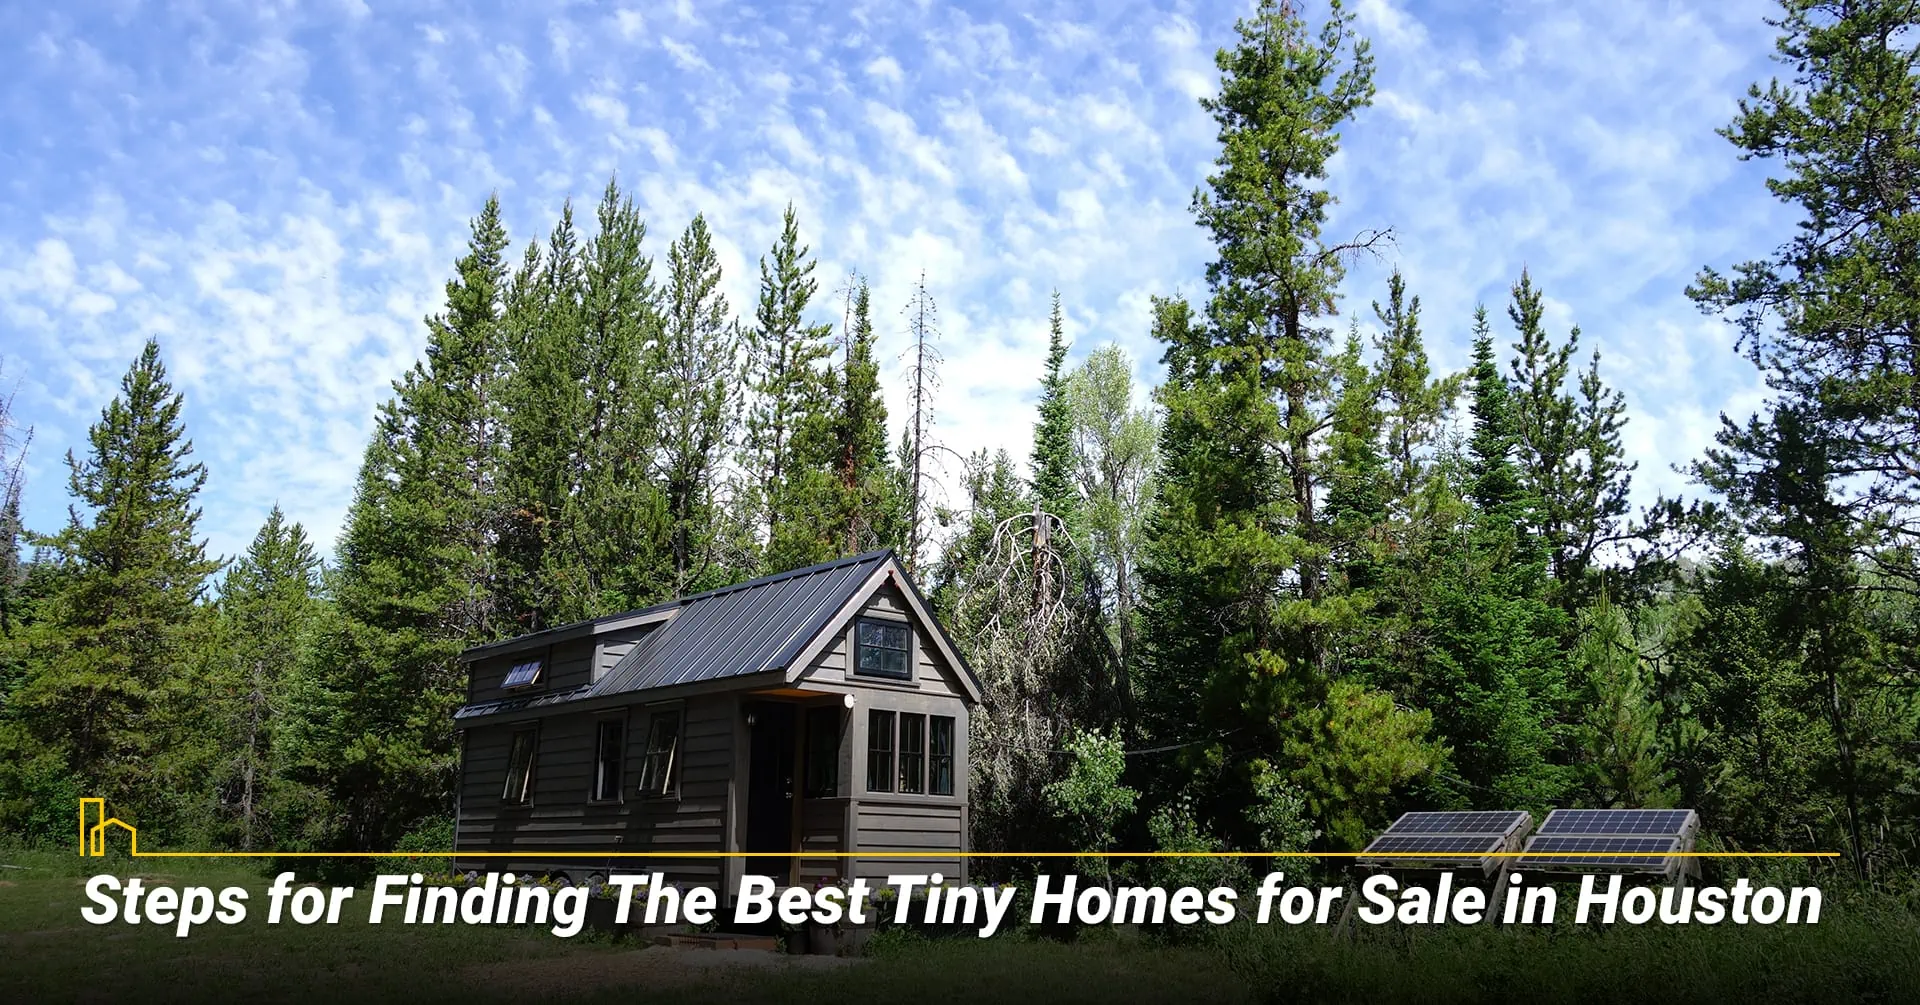 STEPS FOR FINDING THE BEST TINY HOMES FOR SALE IN HOUSTON